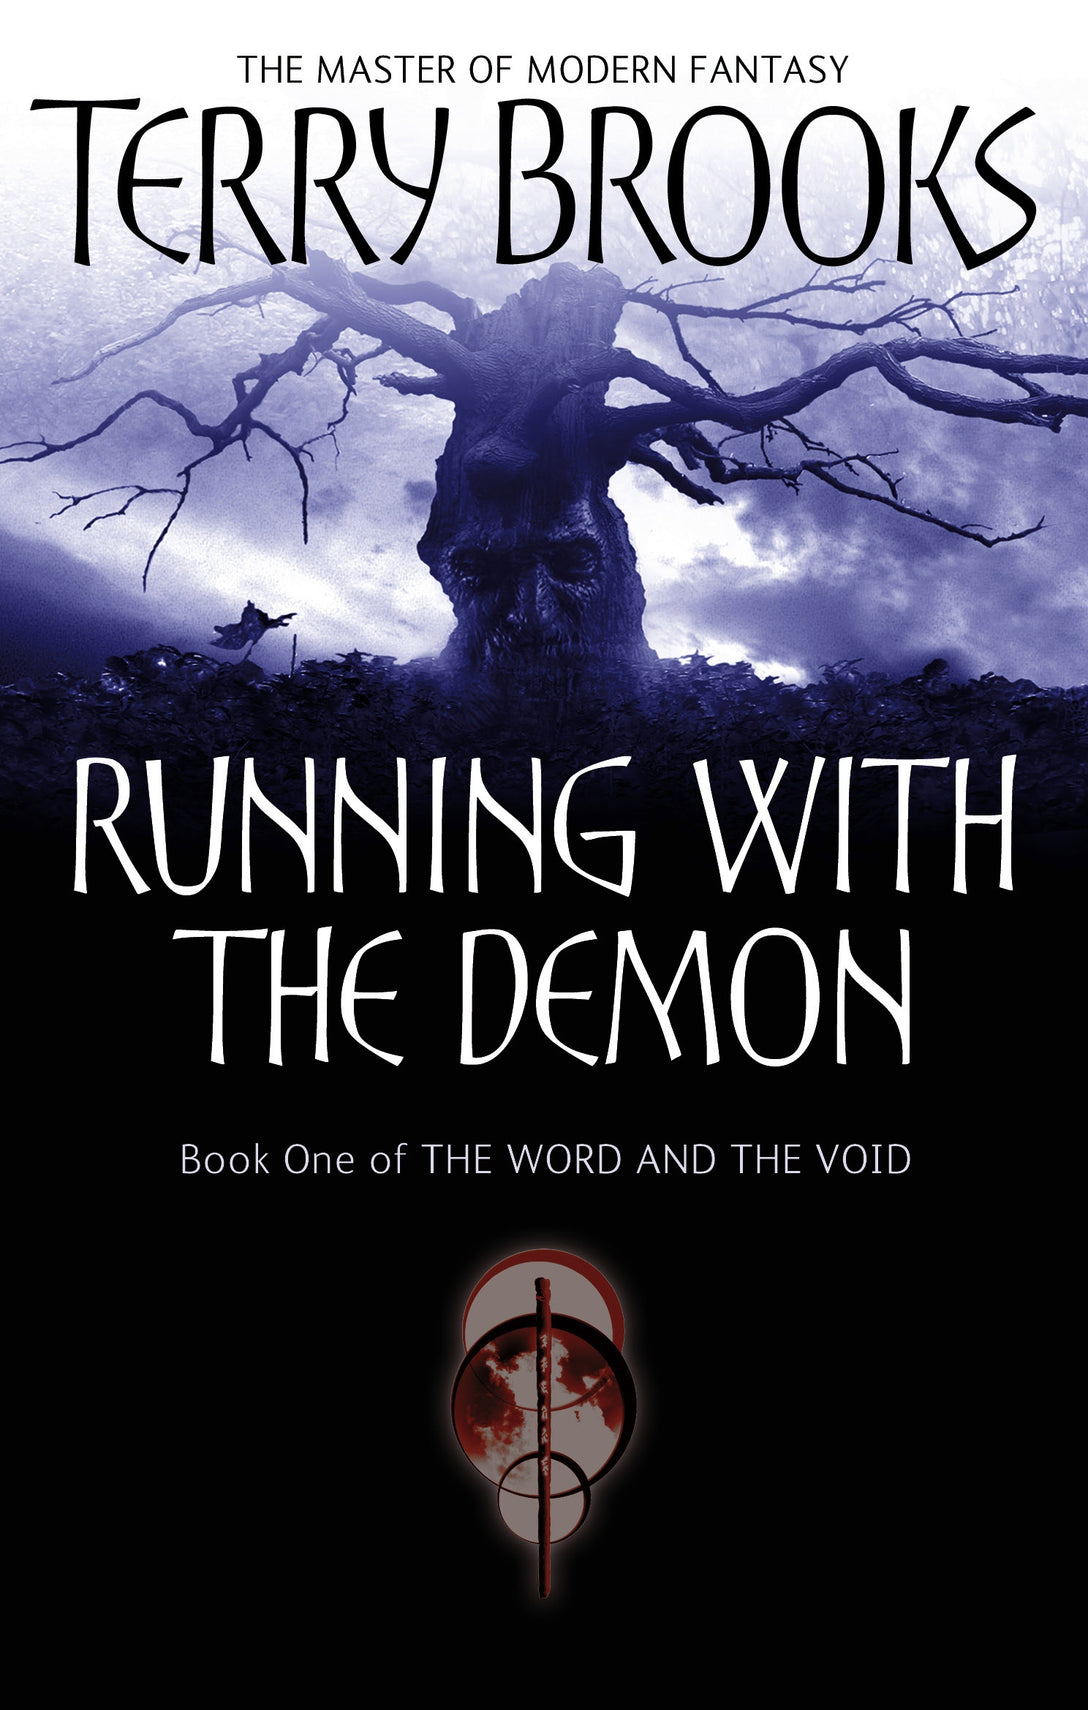 Running With The Demon by Terry Brooks